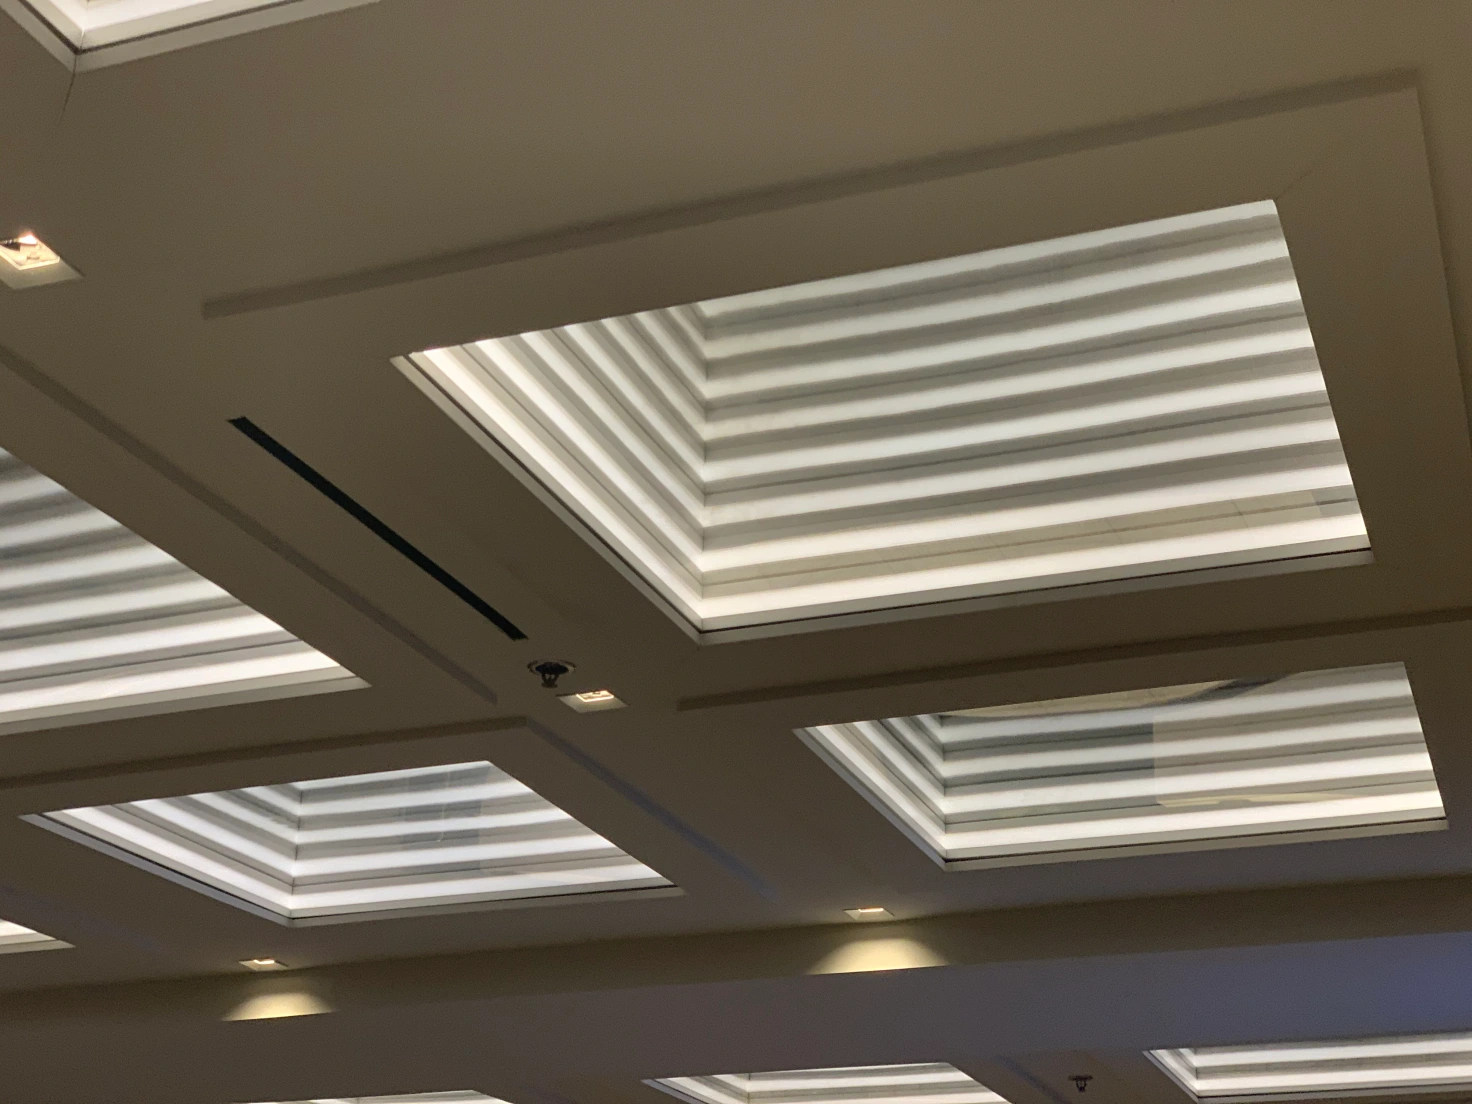 Ceiling lights that are large recessed squares covering the whole ceiling area